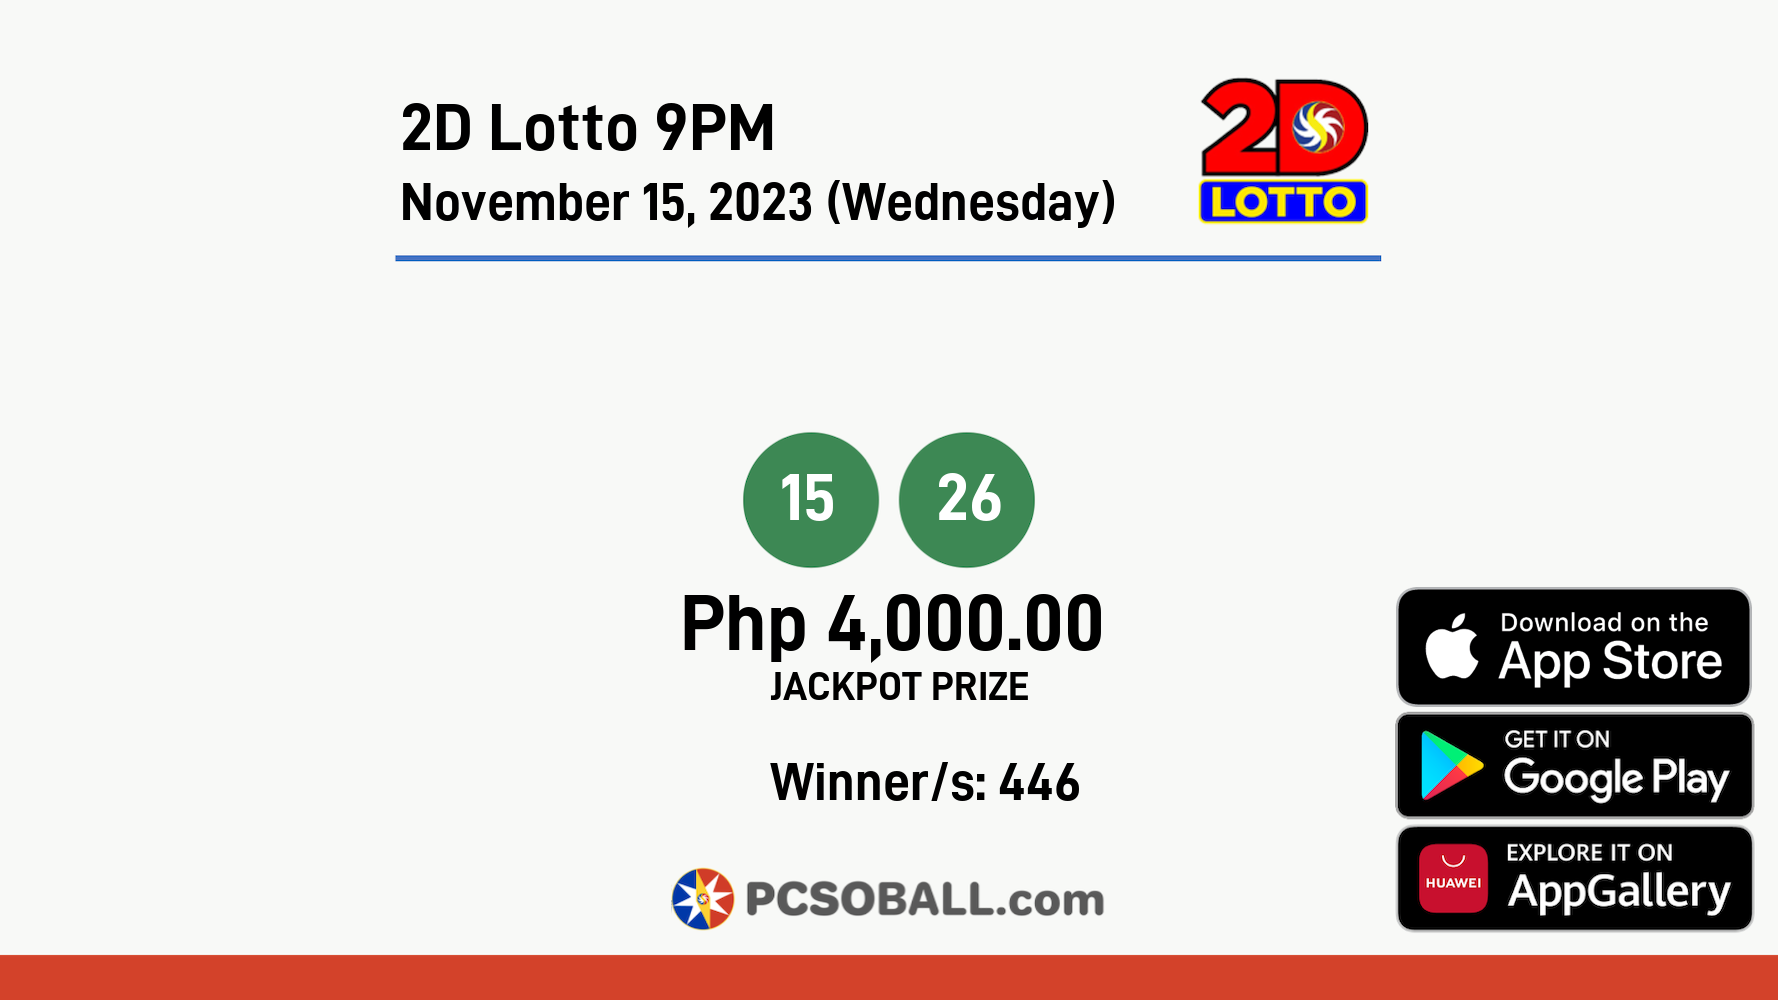 2D Lotto 9PM November 15, 2023 (Wednesday) Result